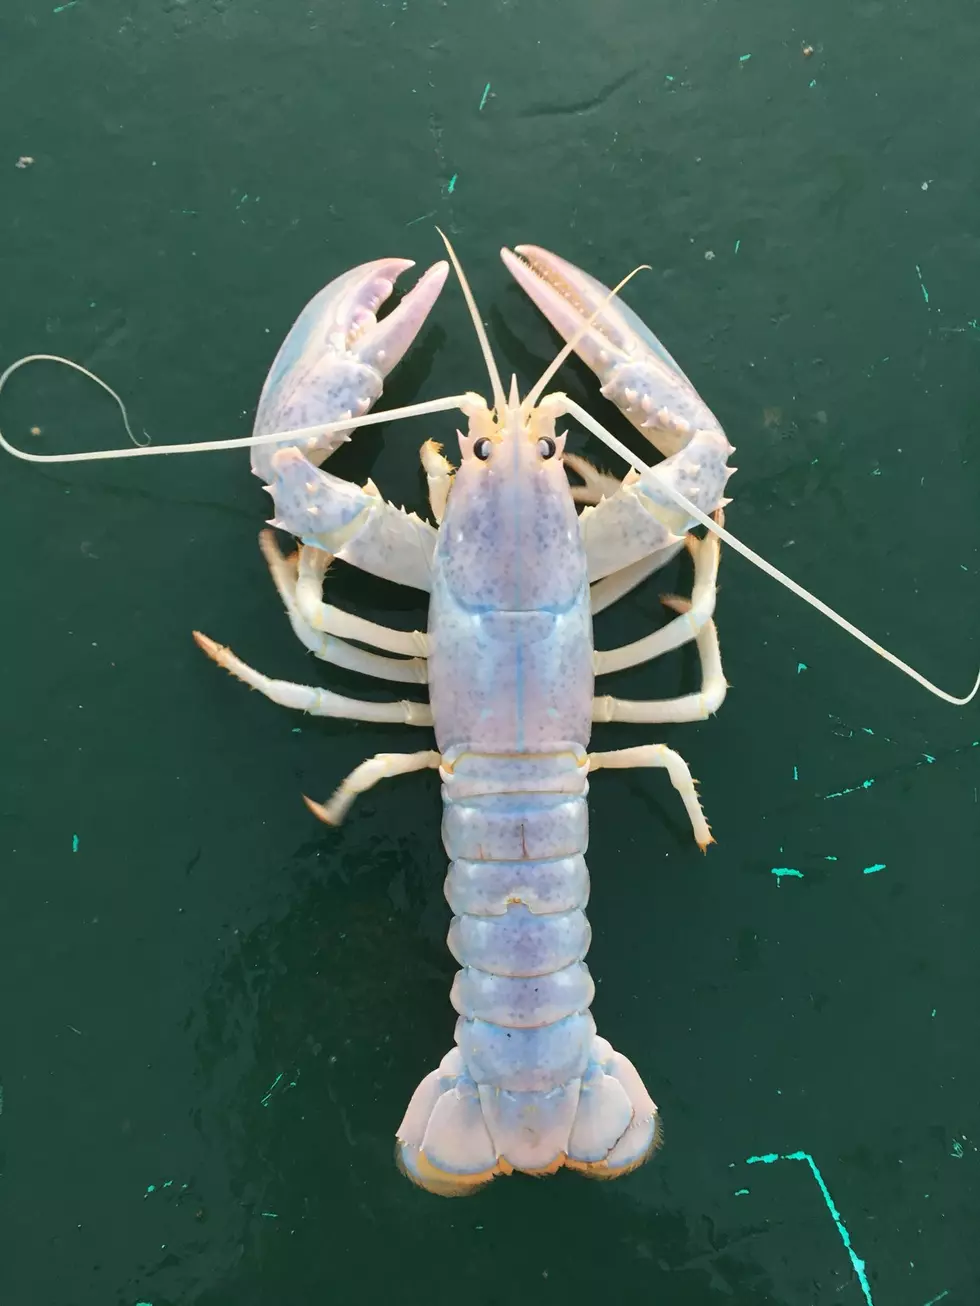 Super Rare Lobster Caught By Local Lobsterman…And Then Let Go